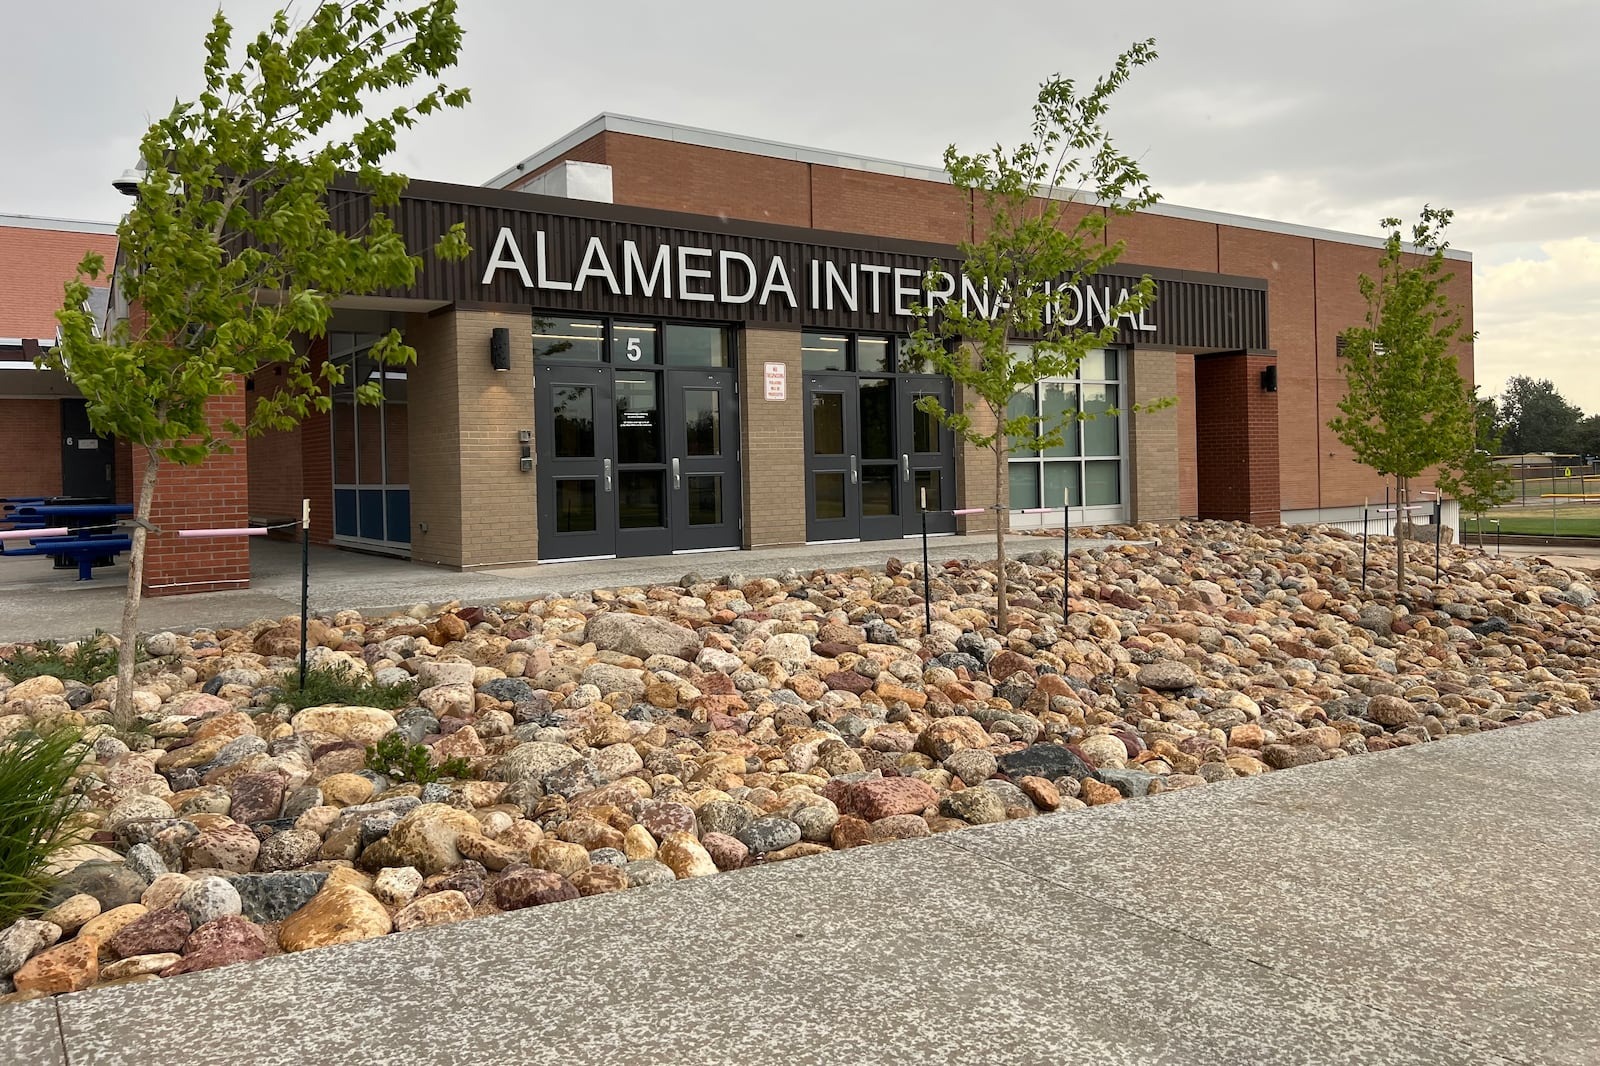 The front of a school building with the sign Alameda International on the front.